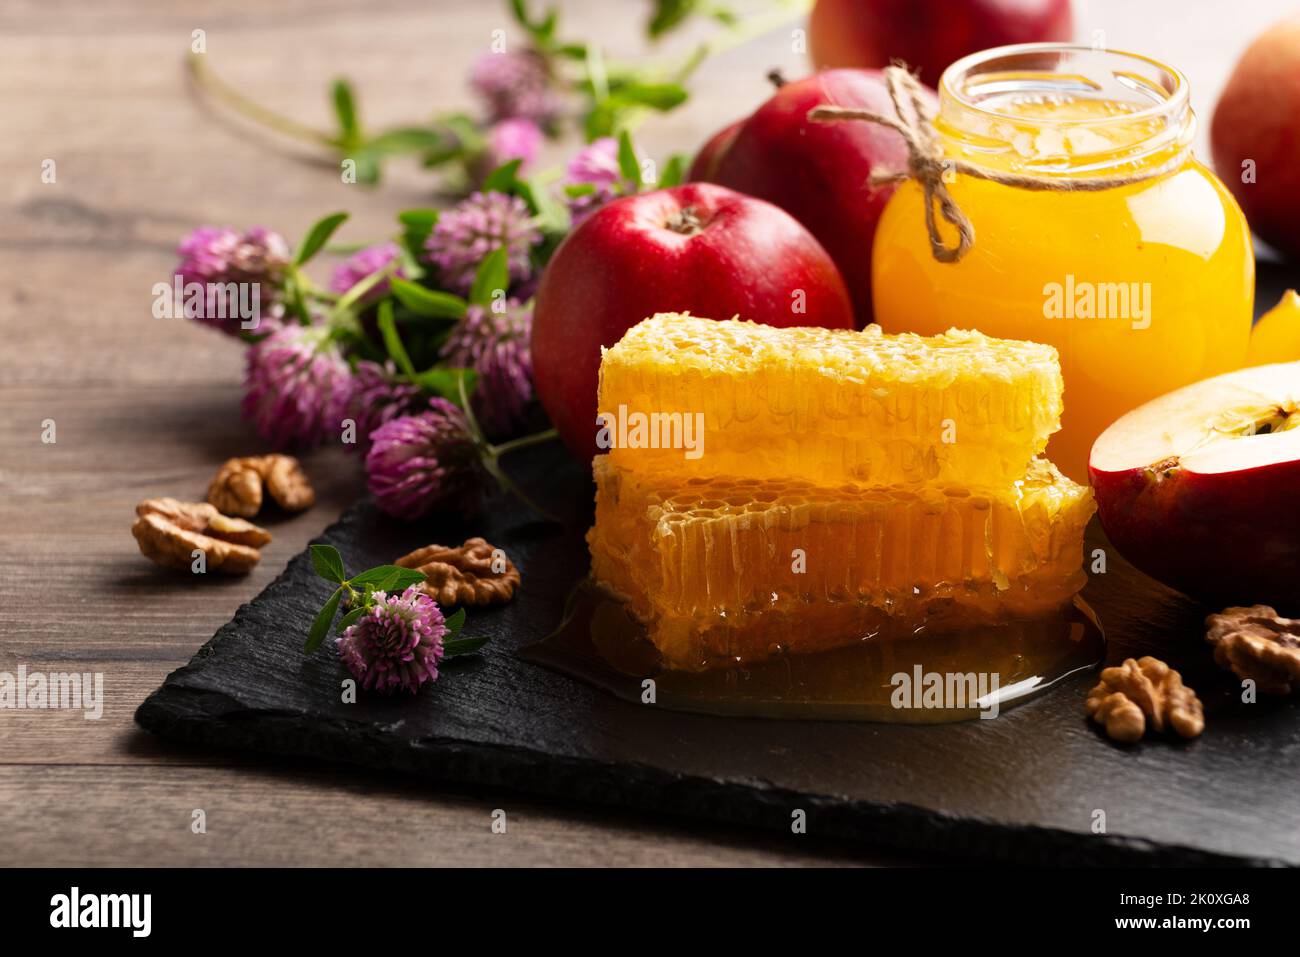 Mason jar with honey, honeycomb, red apples and walnuts on kitchen table Stock Photo